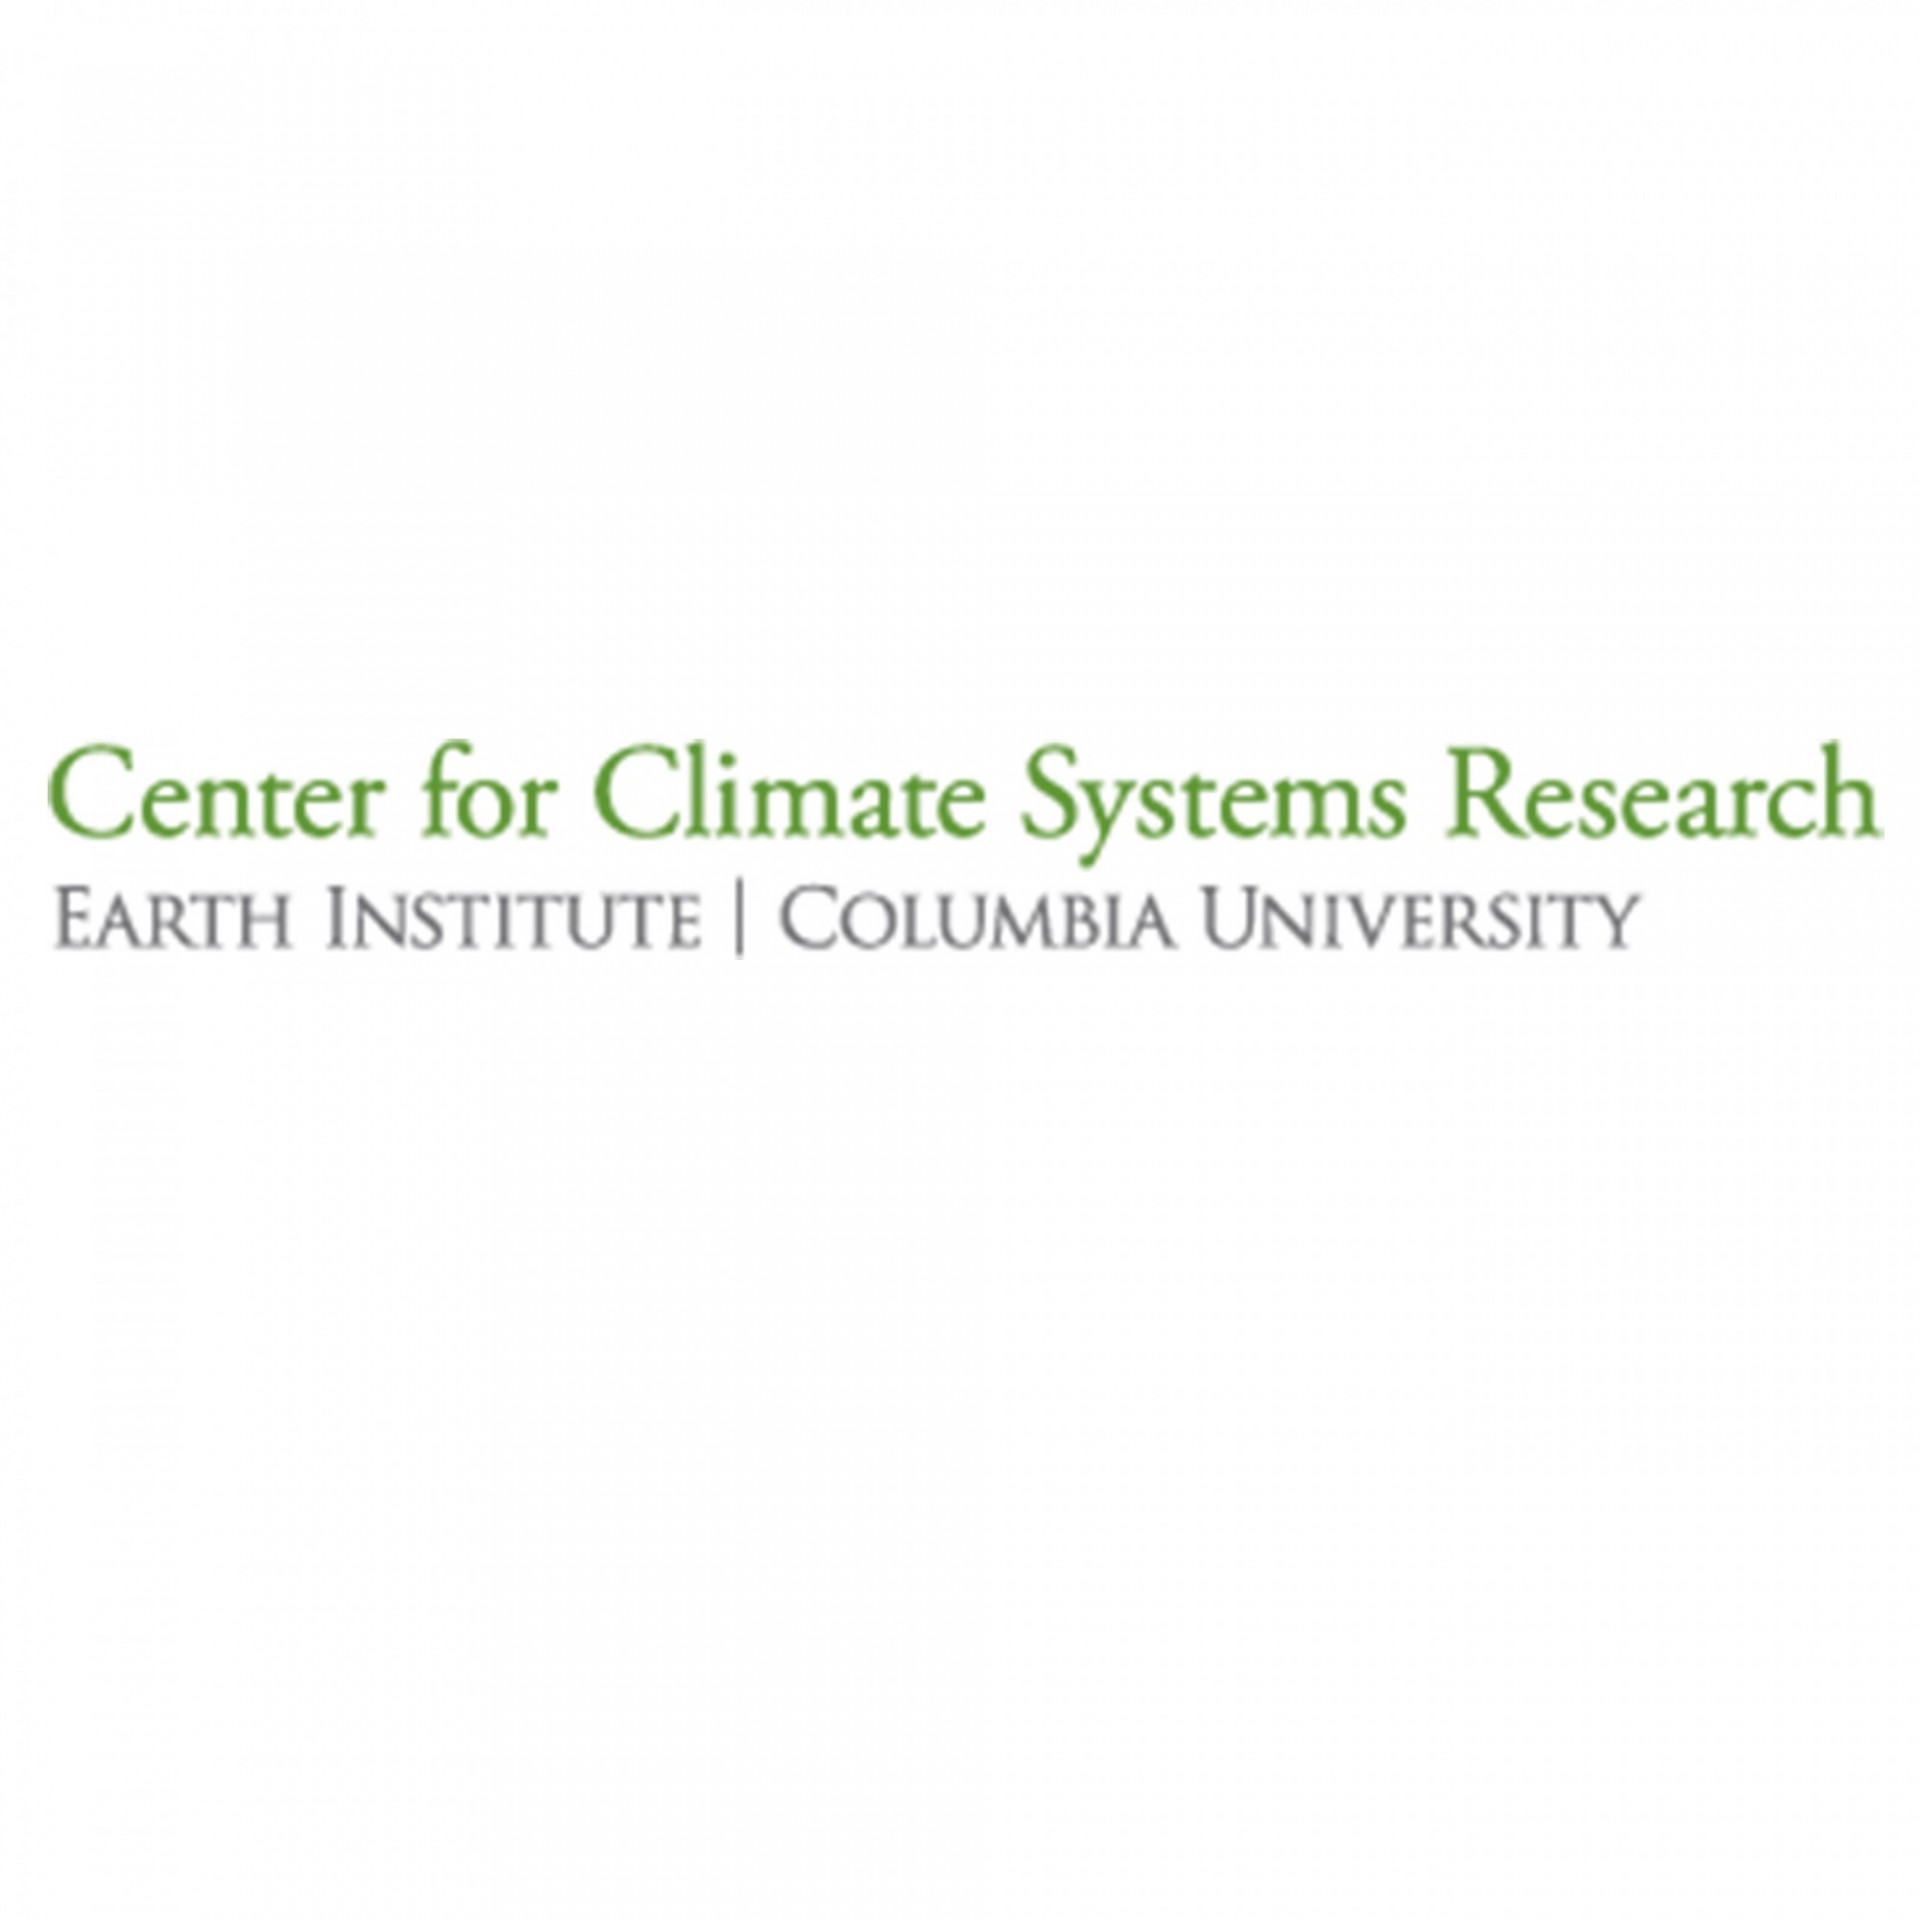 Center for Climate Systems Research